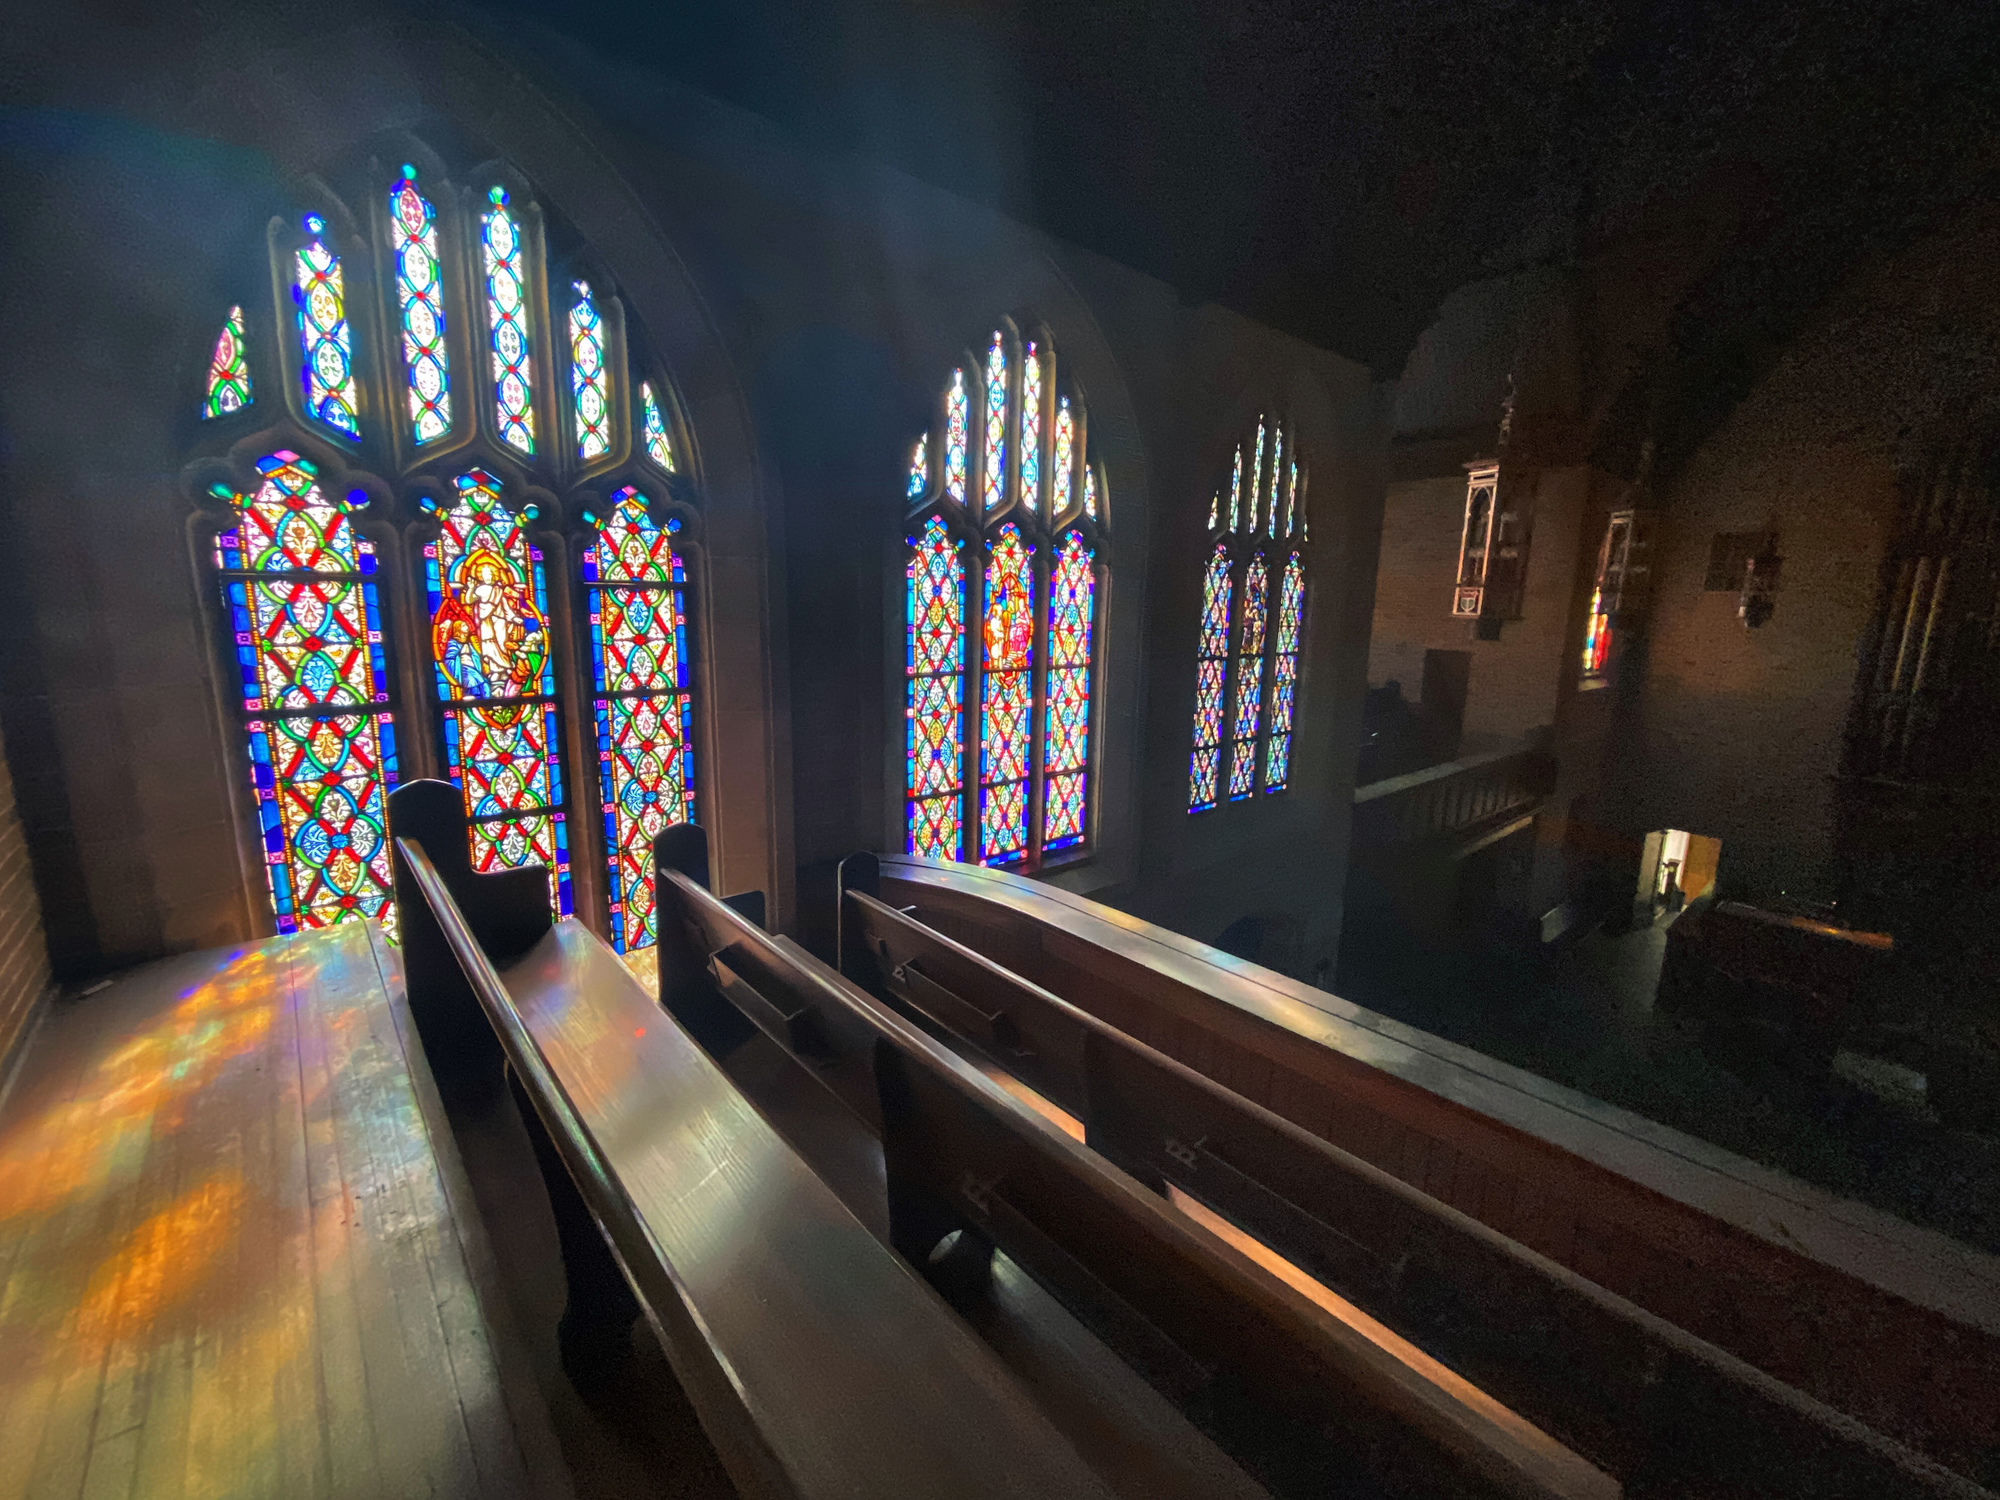 Interior of a church with colorful stained glass windows illuminating wooden benches